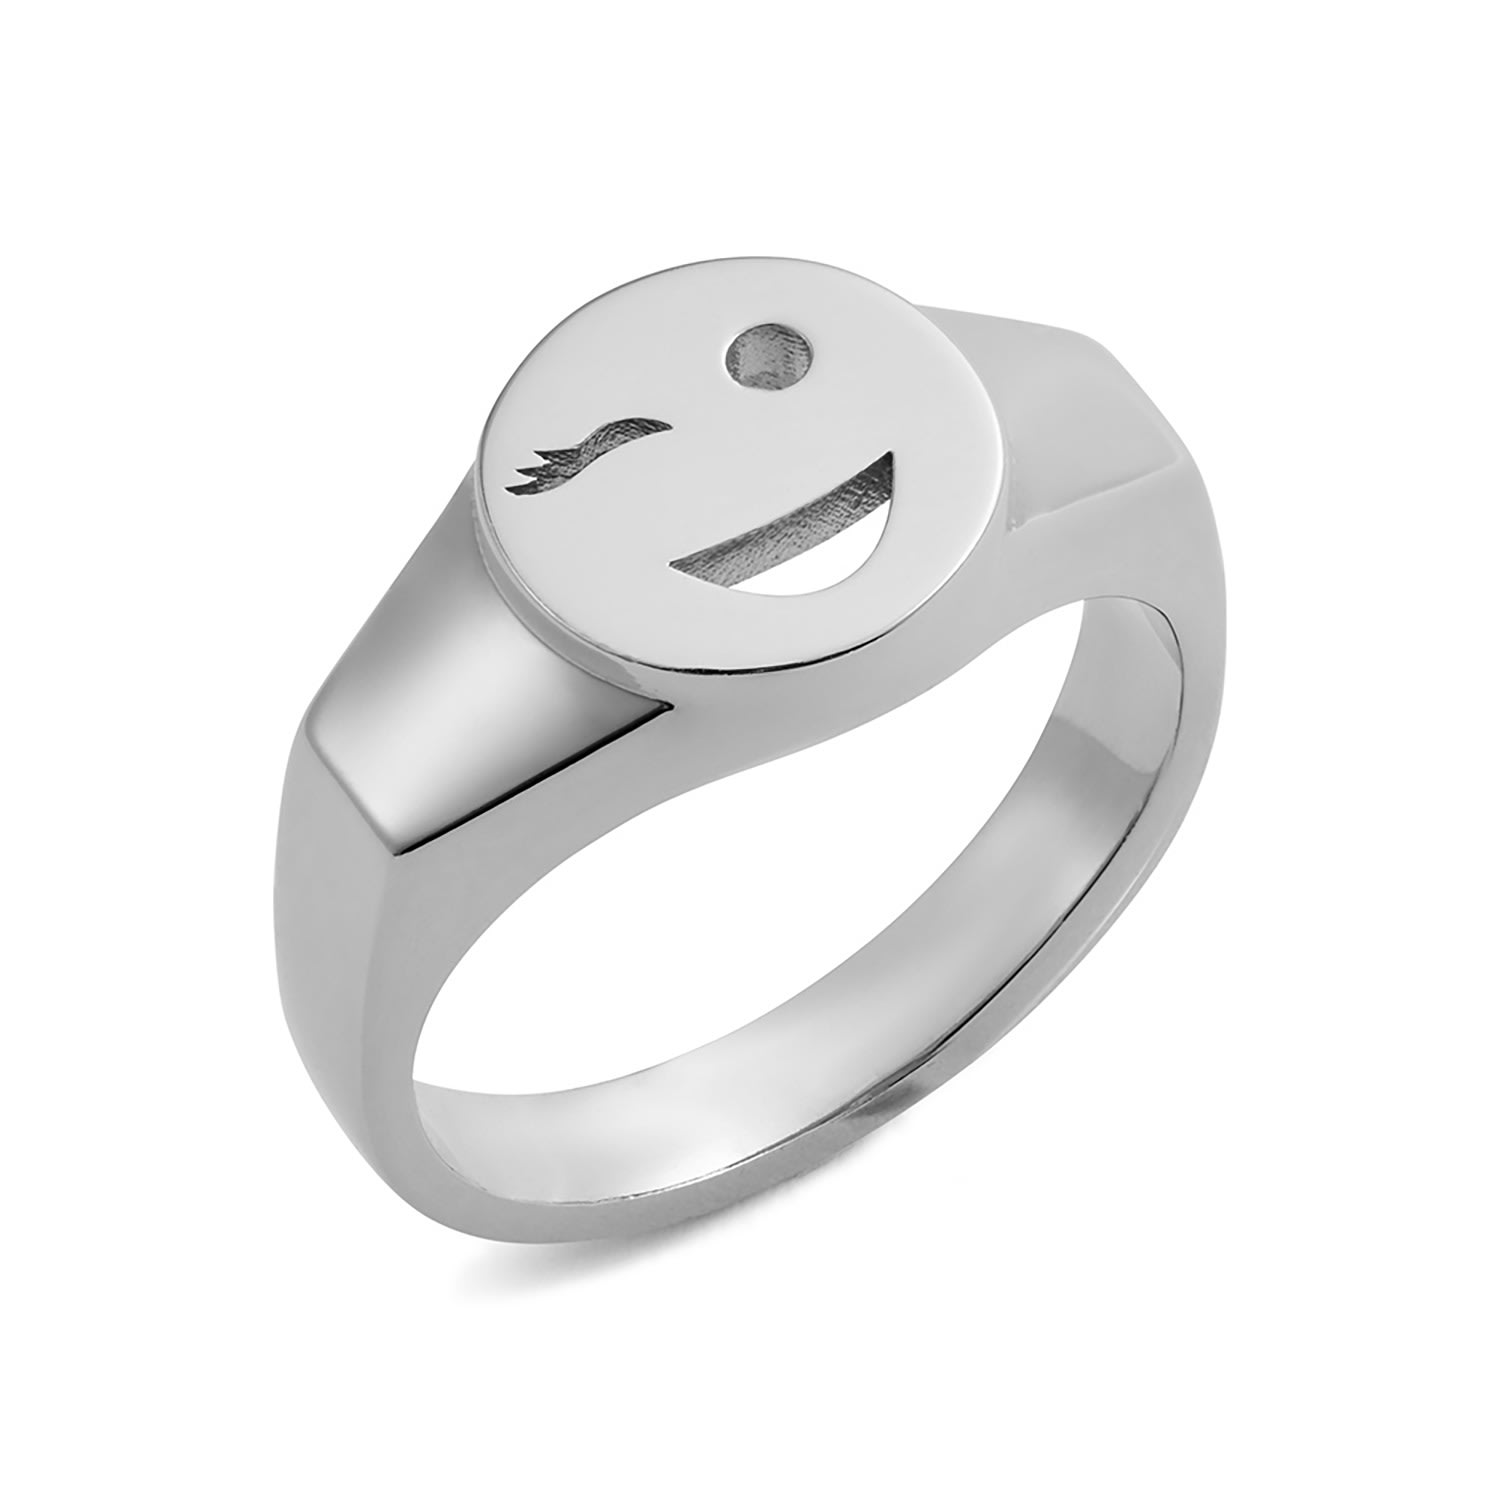 Toolally Women's Mood Signet Ring Wink - Silver